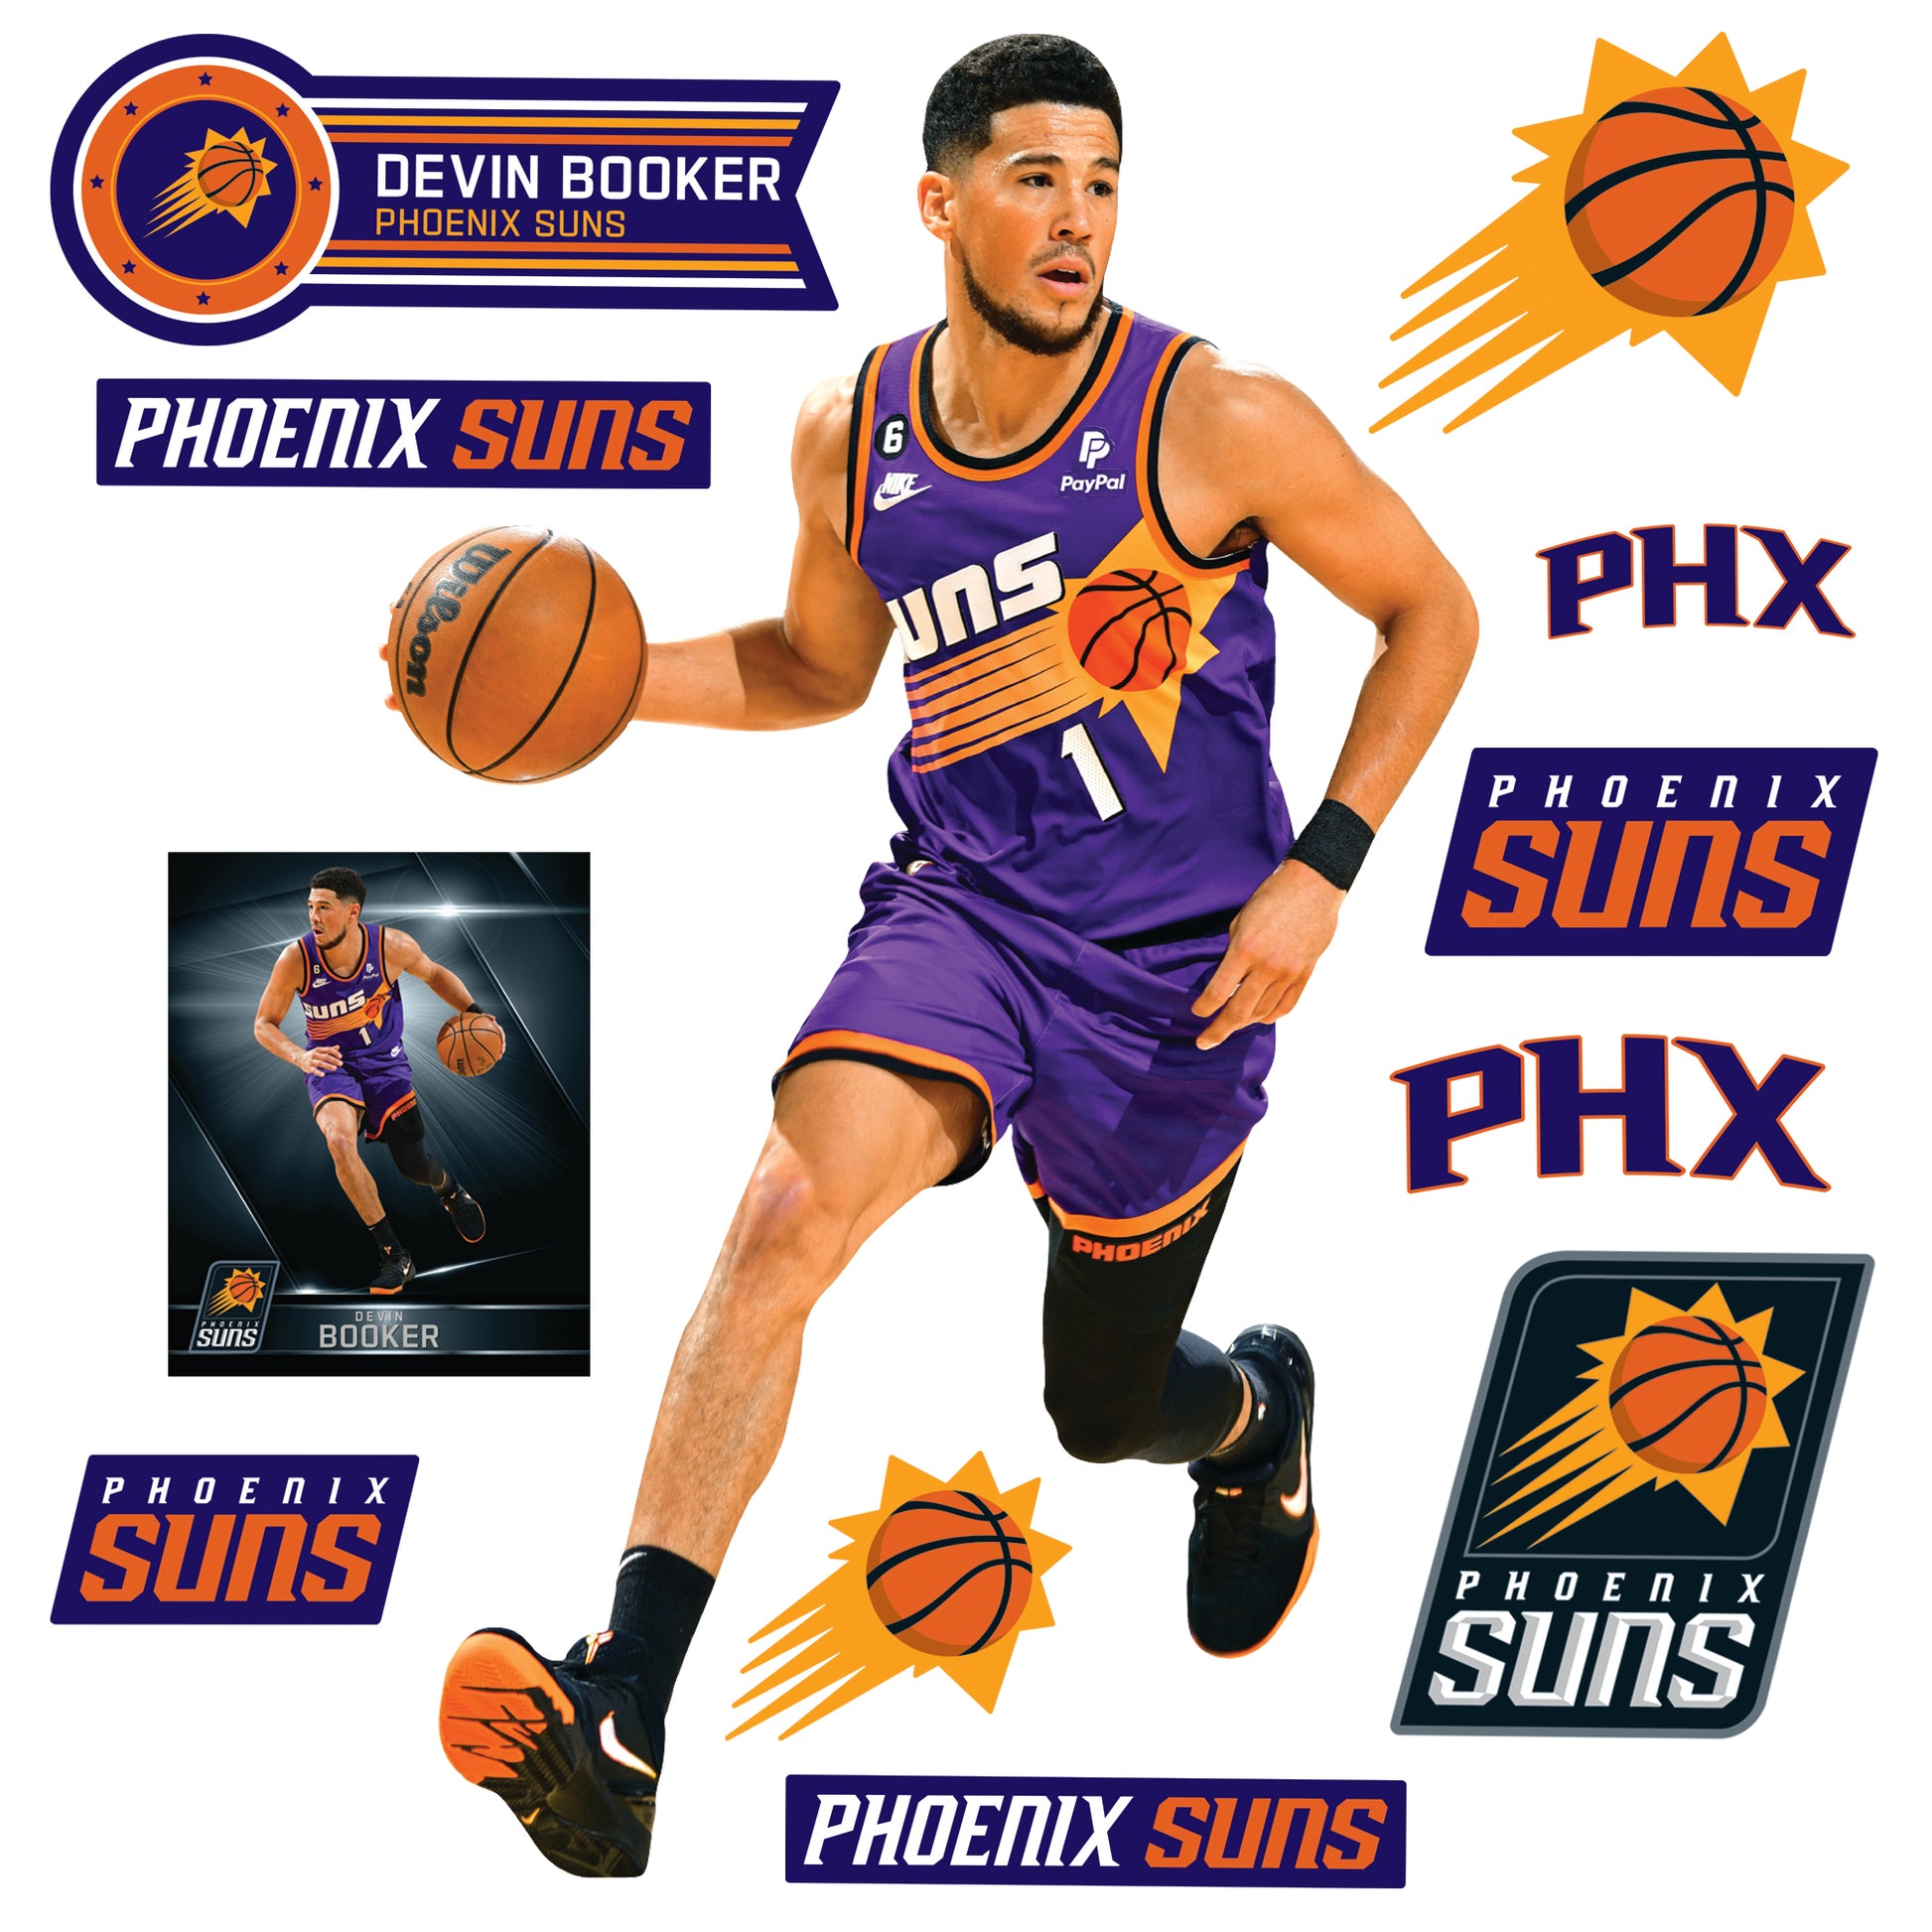 Phoenix Suns Devin Booker Jersey Size Large Official NBA Licensed New